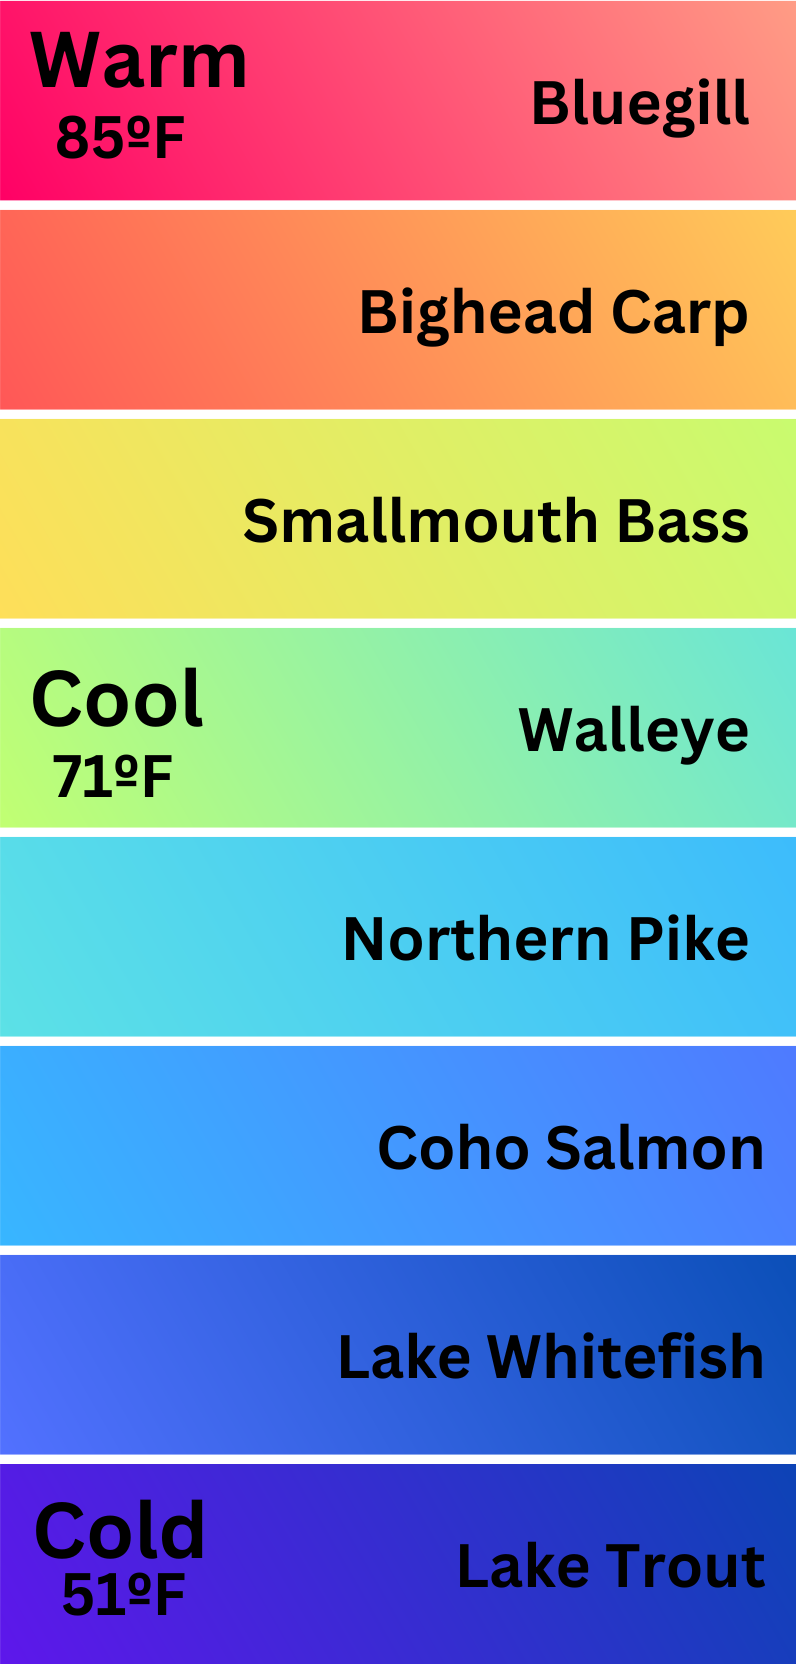 An infographic that shows fish species temperature preferences from warm to cold water ranging from 85 to 51 degrees Farenheit. Warmer water fish include Bluegill, Bighead Carp, and Smallmouth Bass. Cool water fish include Walleye, Northern Pike, Coho Salmon, Lake Whitefish and Lake Trout.